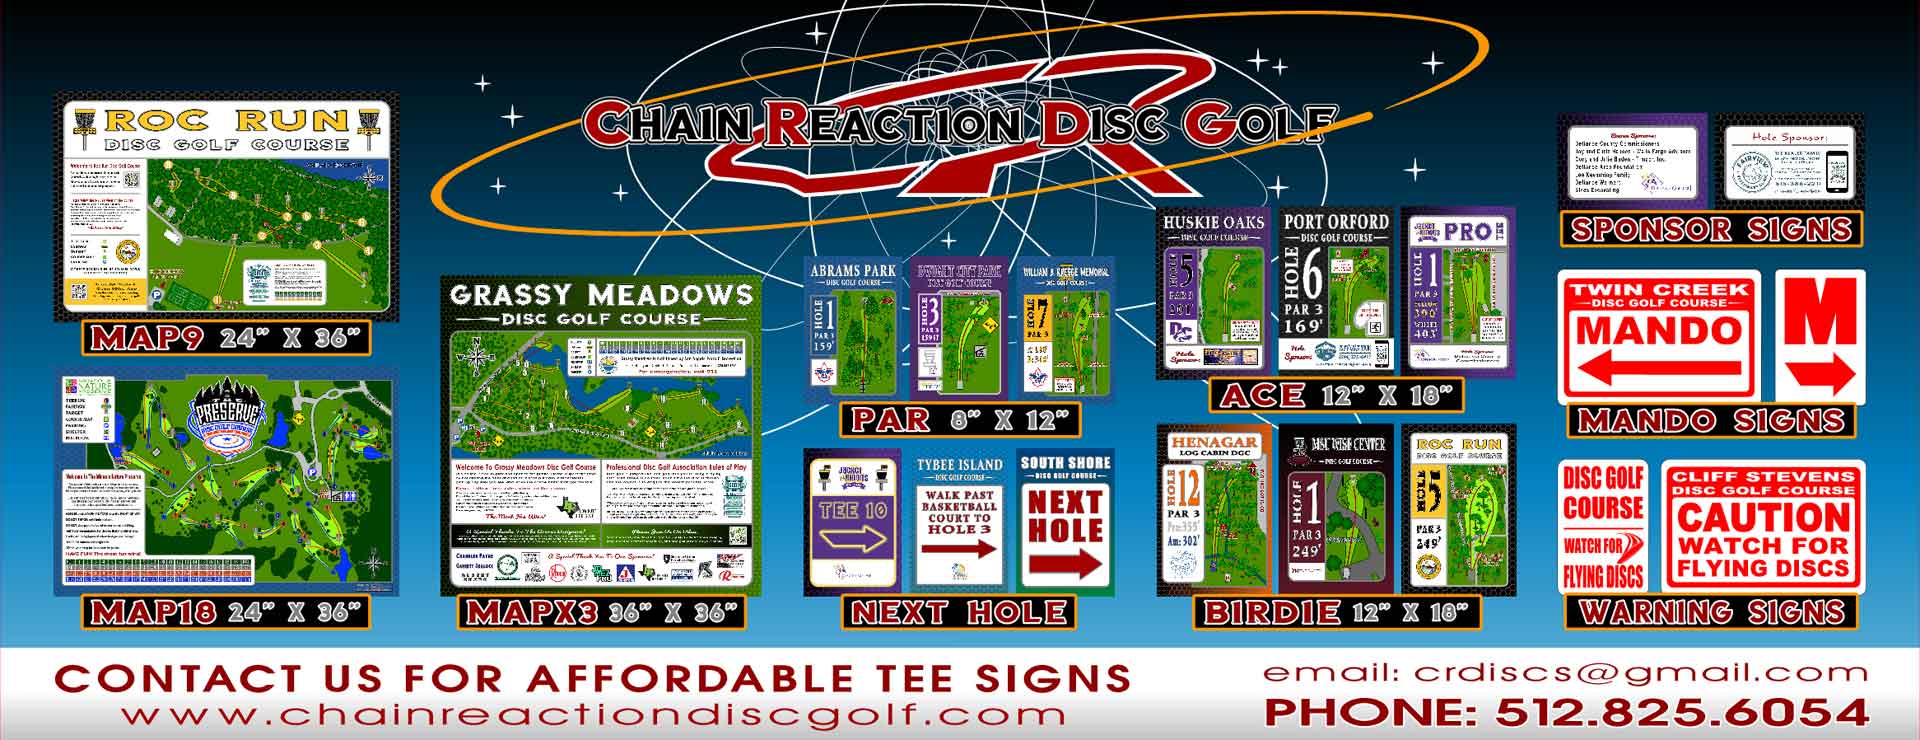 Chain Reaction Disc Golf Tee Sign and Disc Golf Map Home Slide